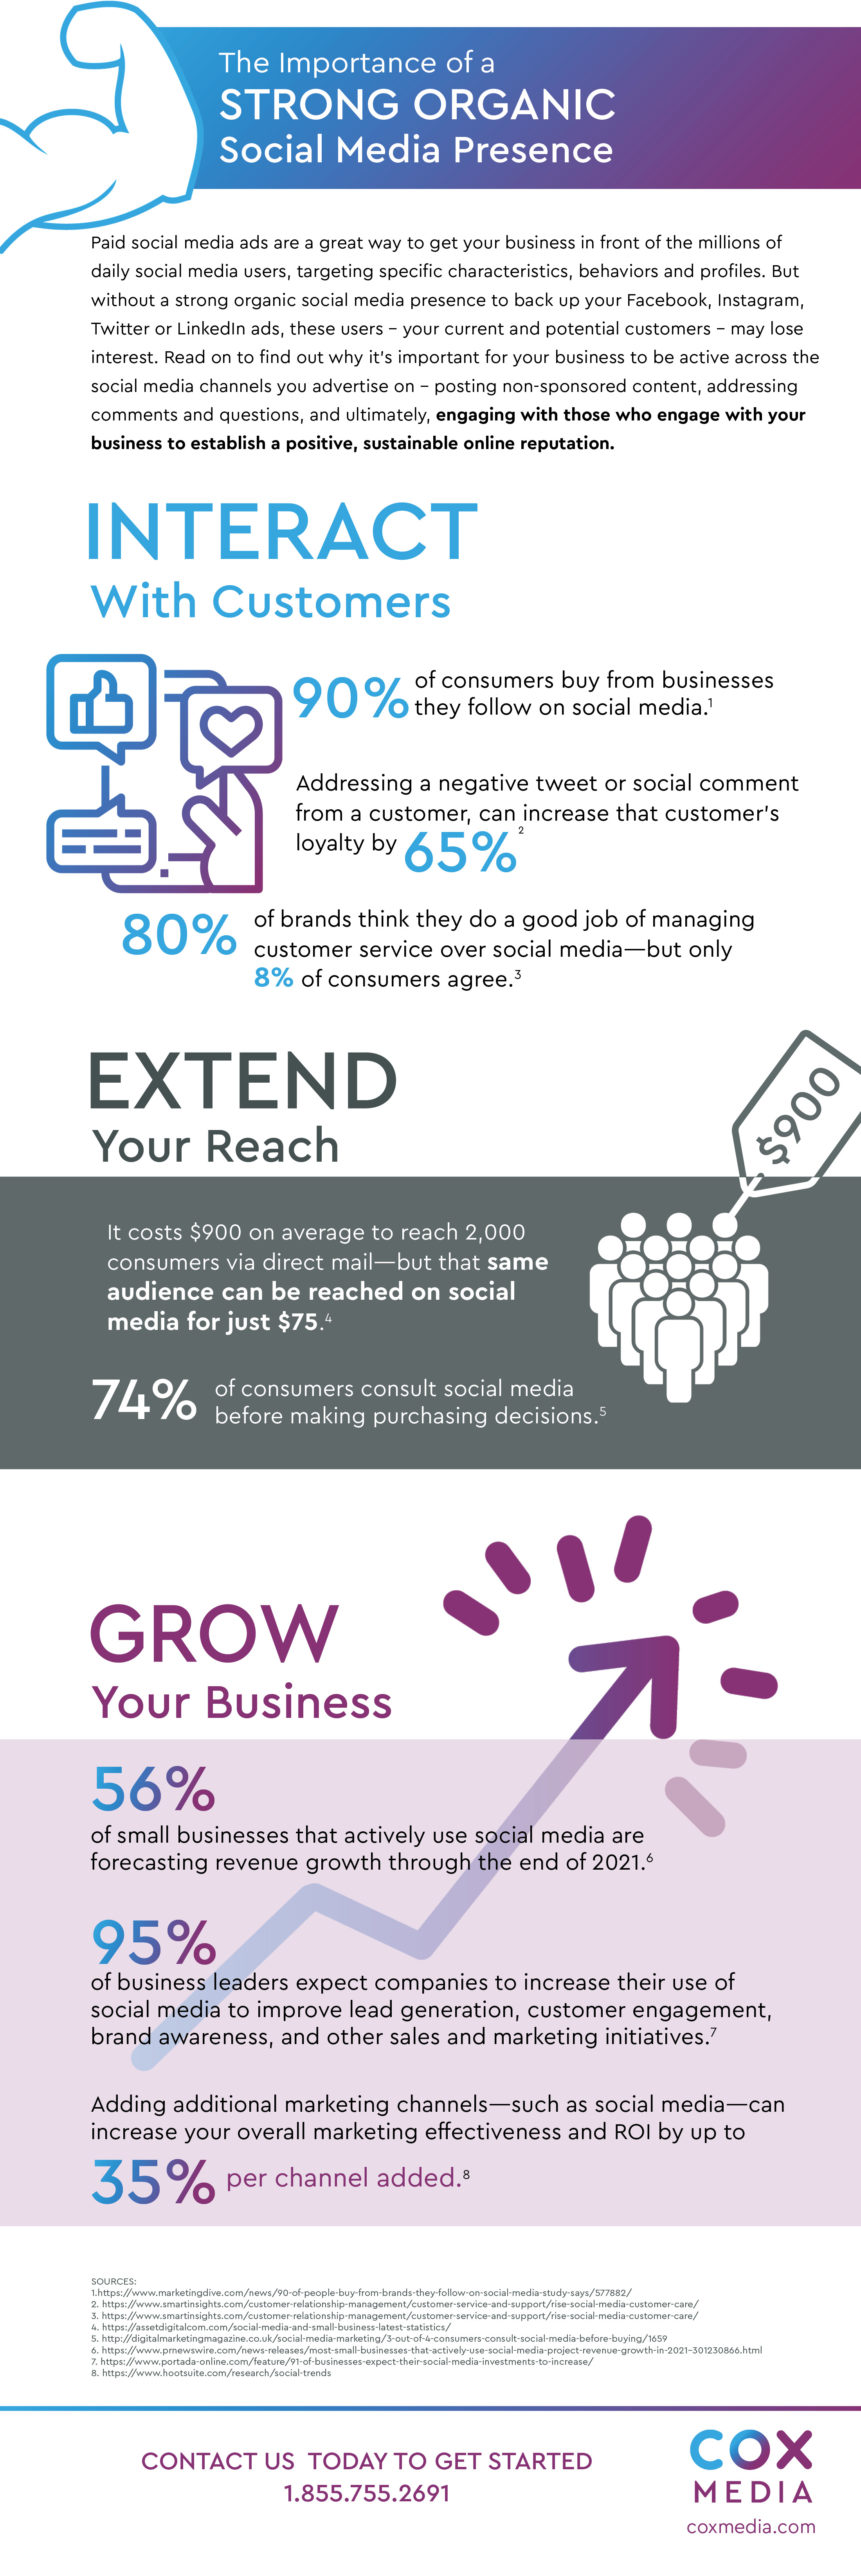 Social Media Campaign infographic_FINAL (003)